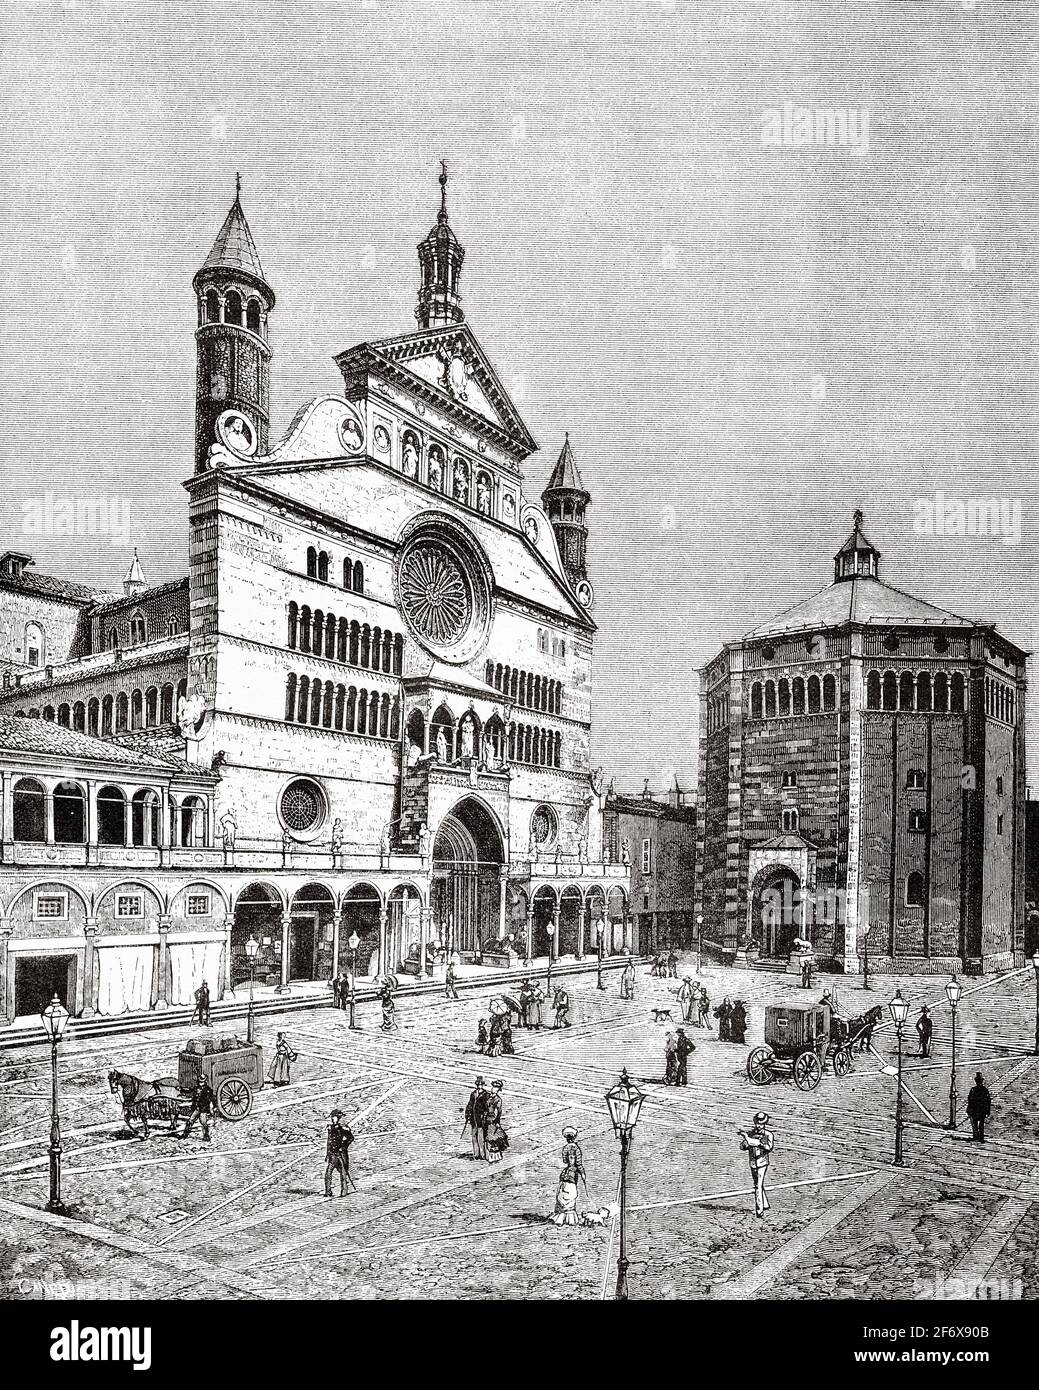 Baptistery and Cathedral, Cremona. Lombardy, Italy. Europe. Old 19th century engraved illustration from El Mundo Ilustrado 1879 Stock Photo